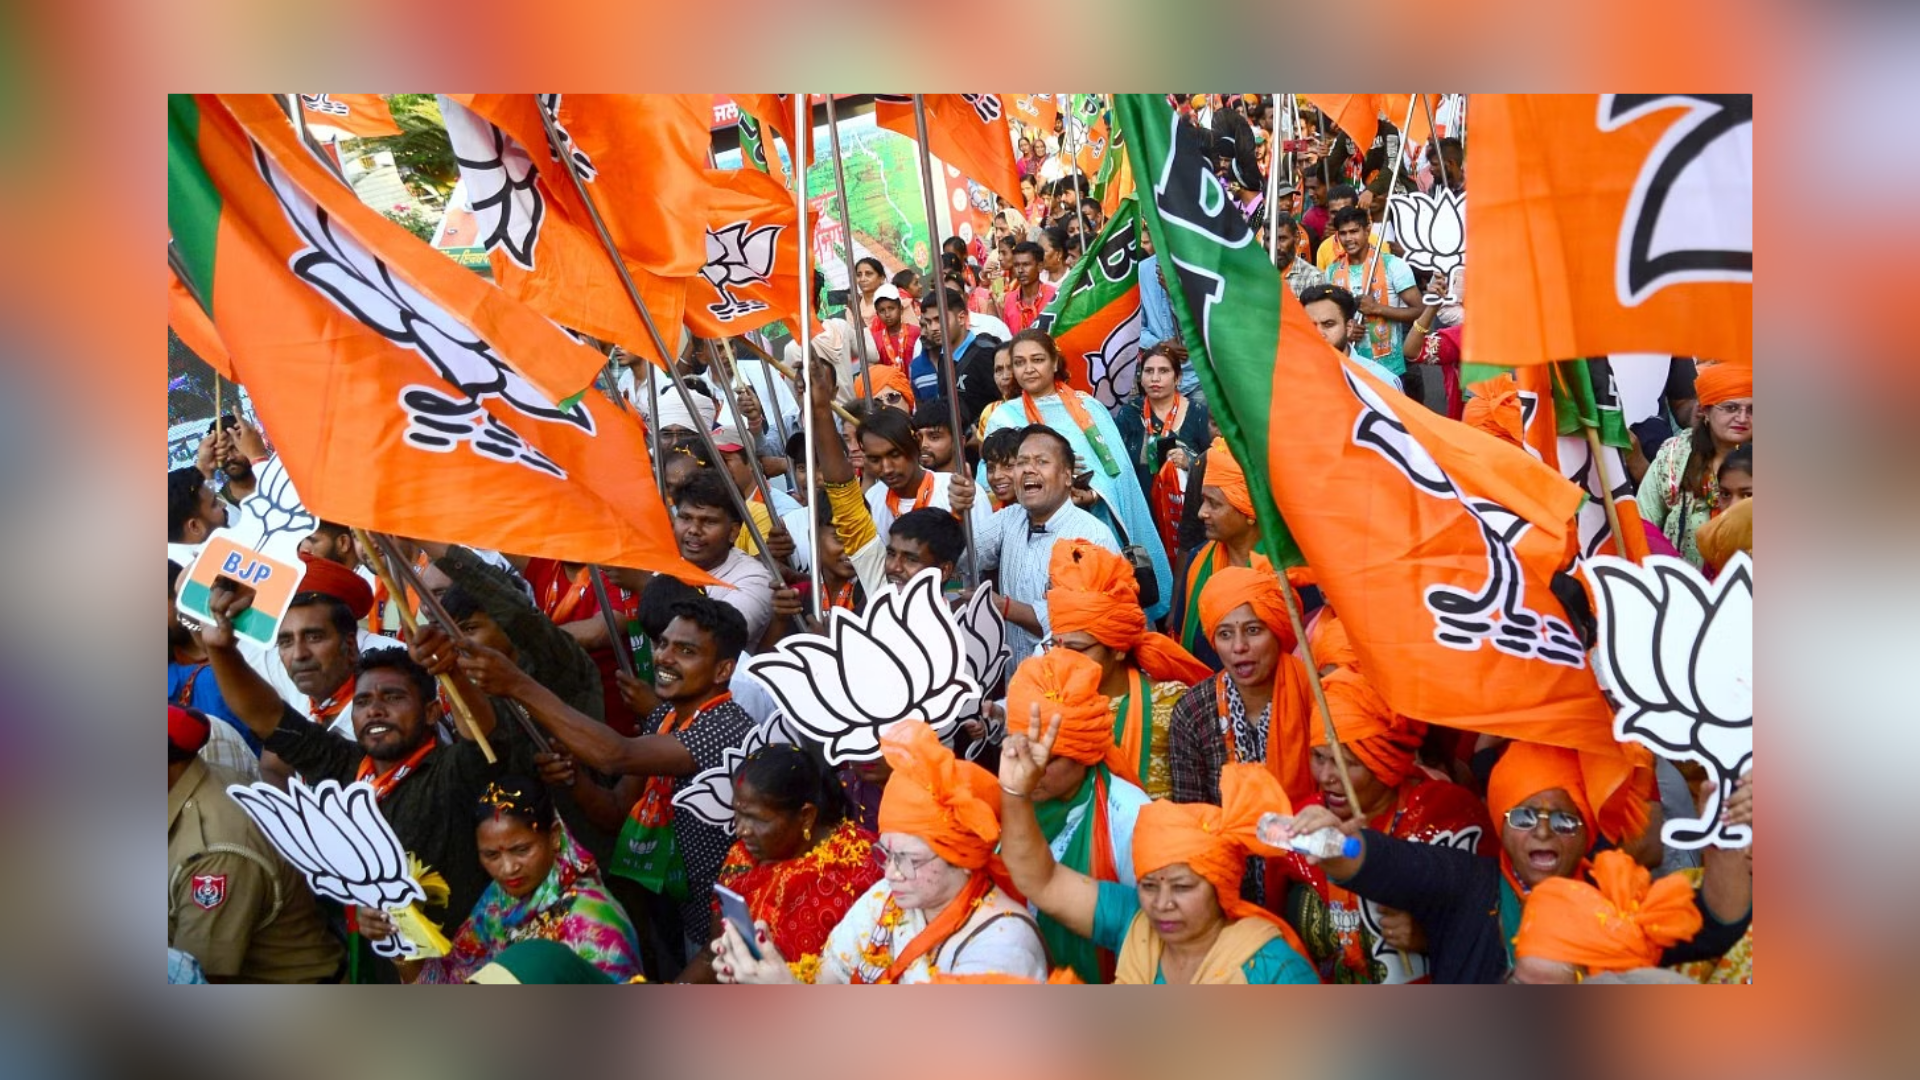 BJP’s 10th Candidate List Revealed: Neeraj Shekhar To Contest From Ballia, SS Ahluwalia To Stand In Asansol